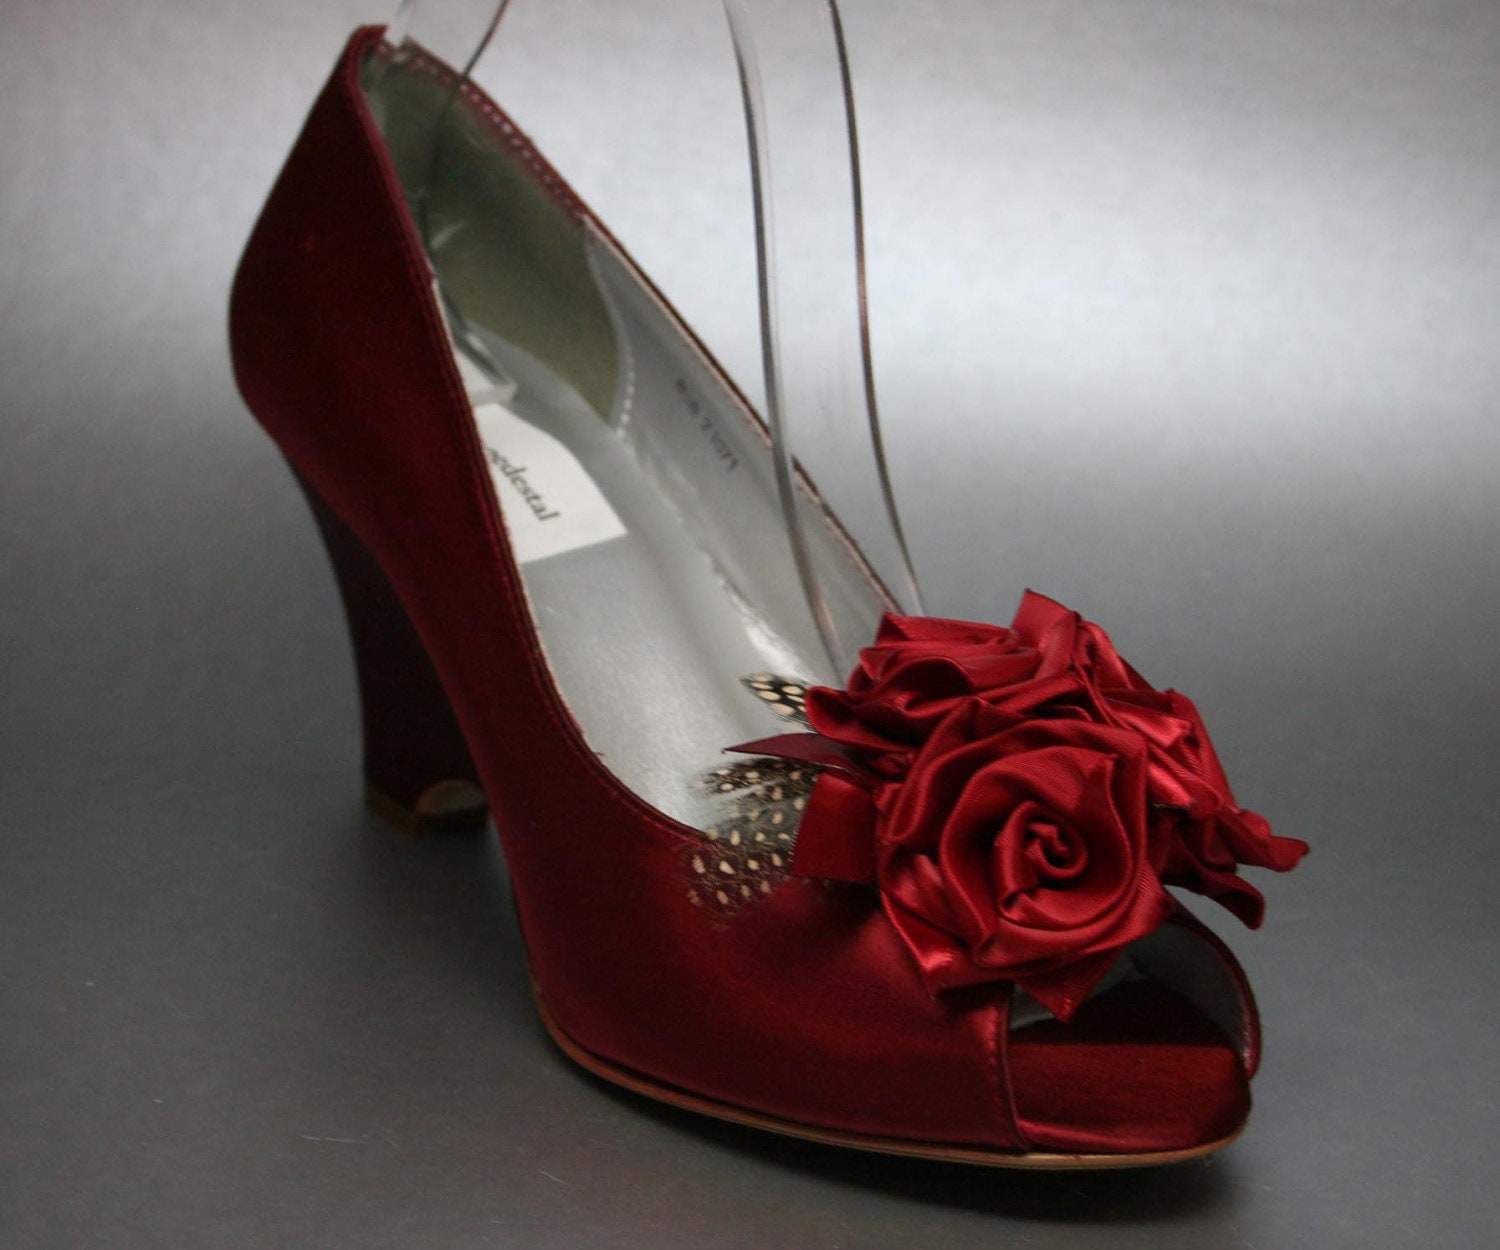 Wedding Shoes -- Scarlet Red Peeptoe Wedges with Matching Trio of Roses Adornment